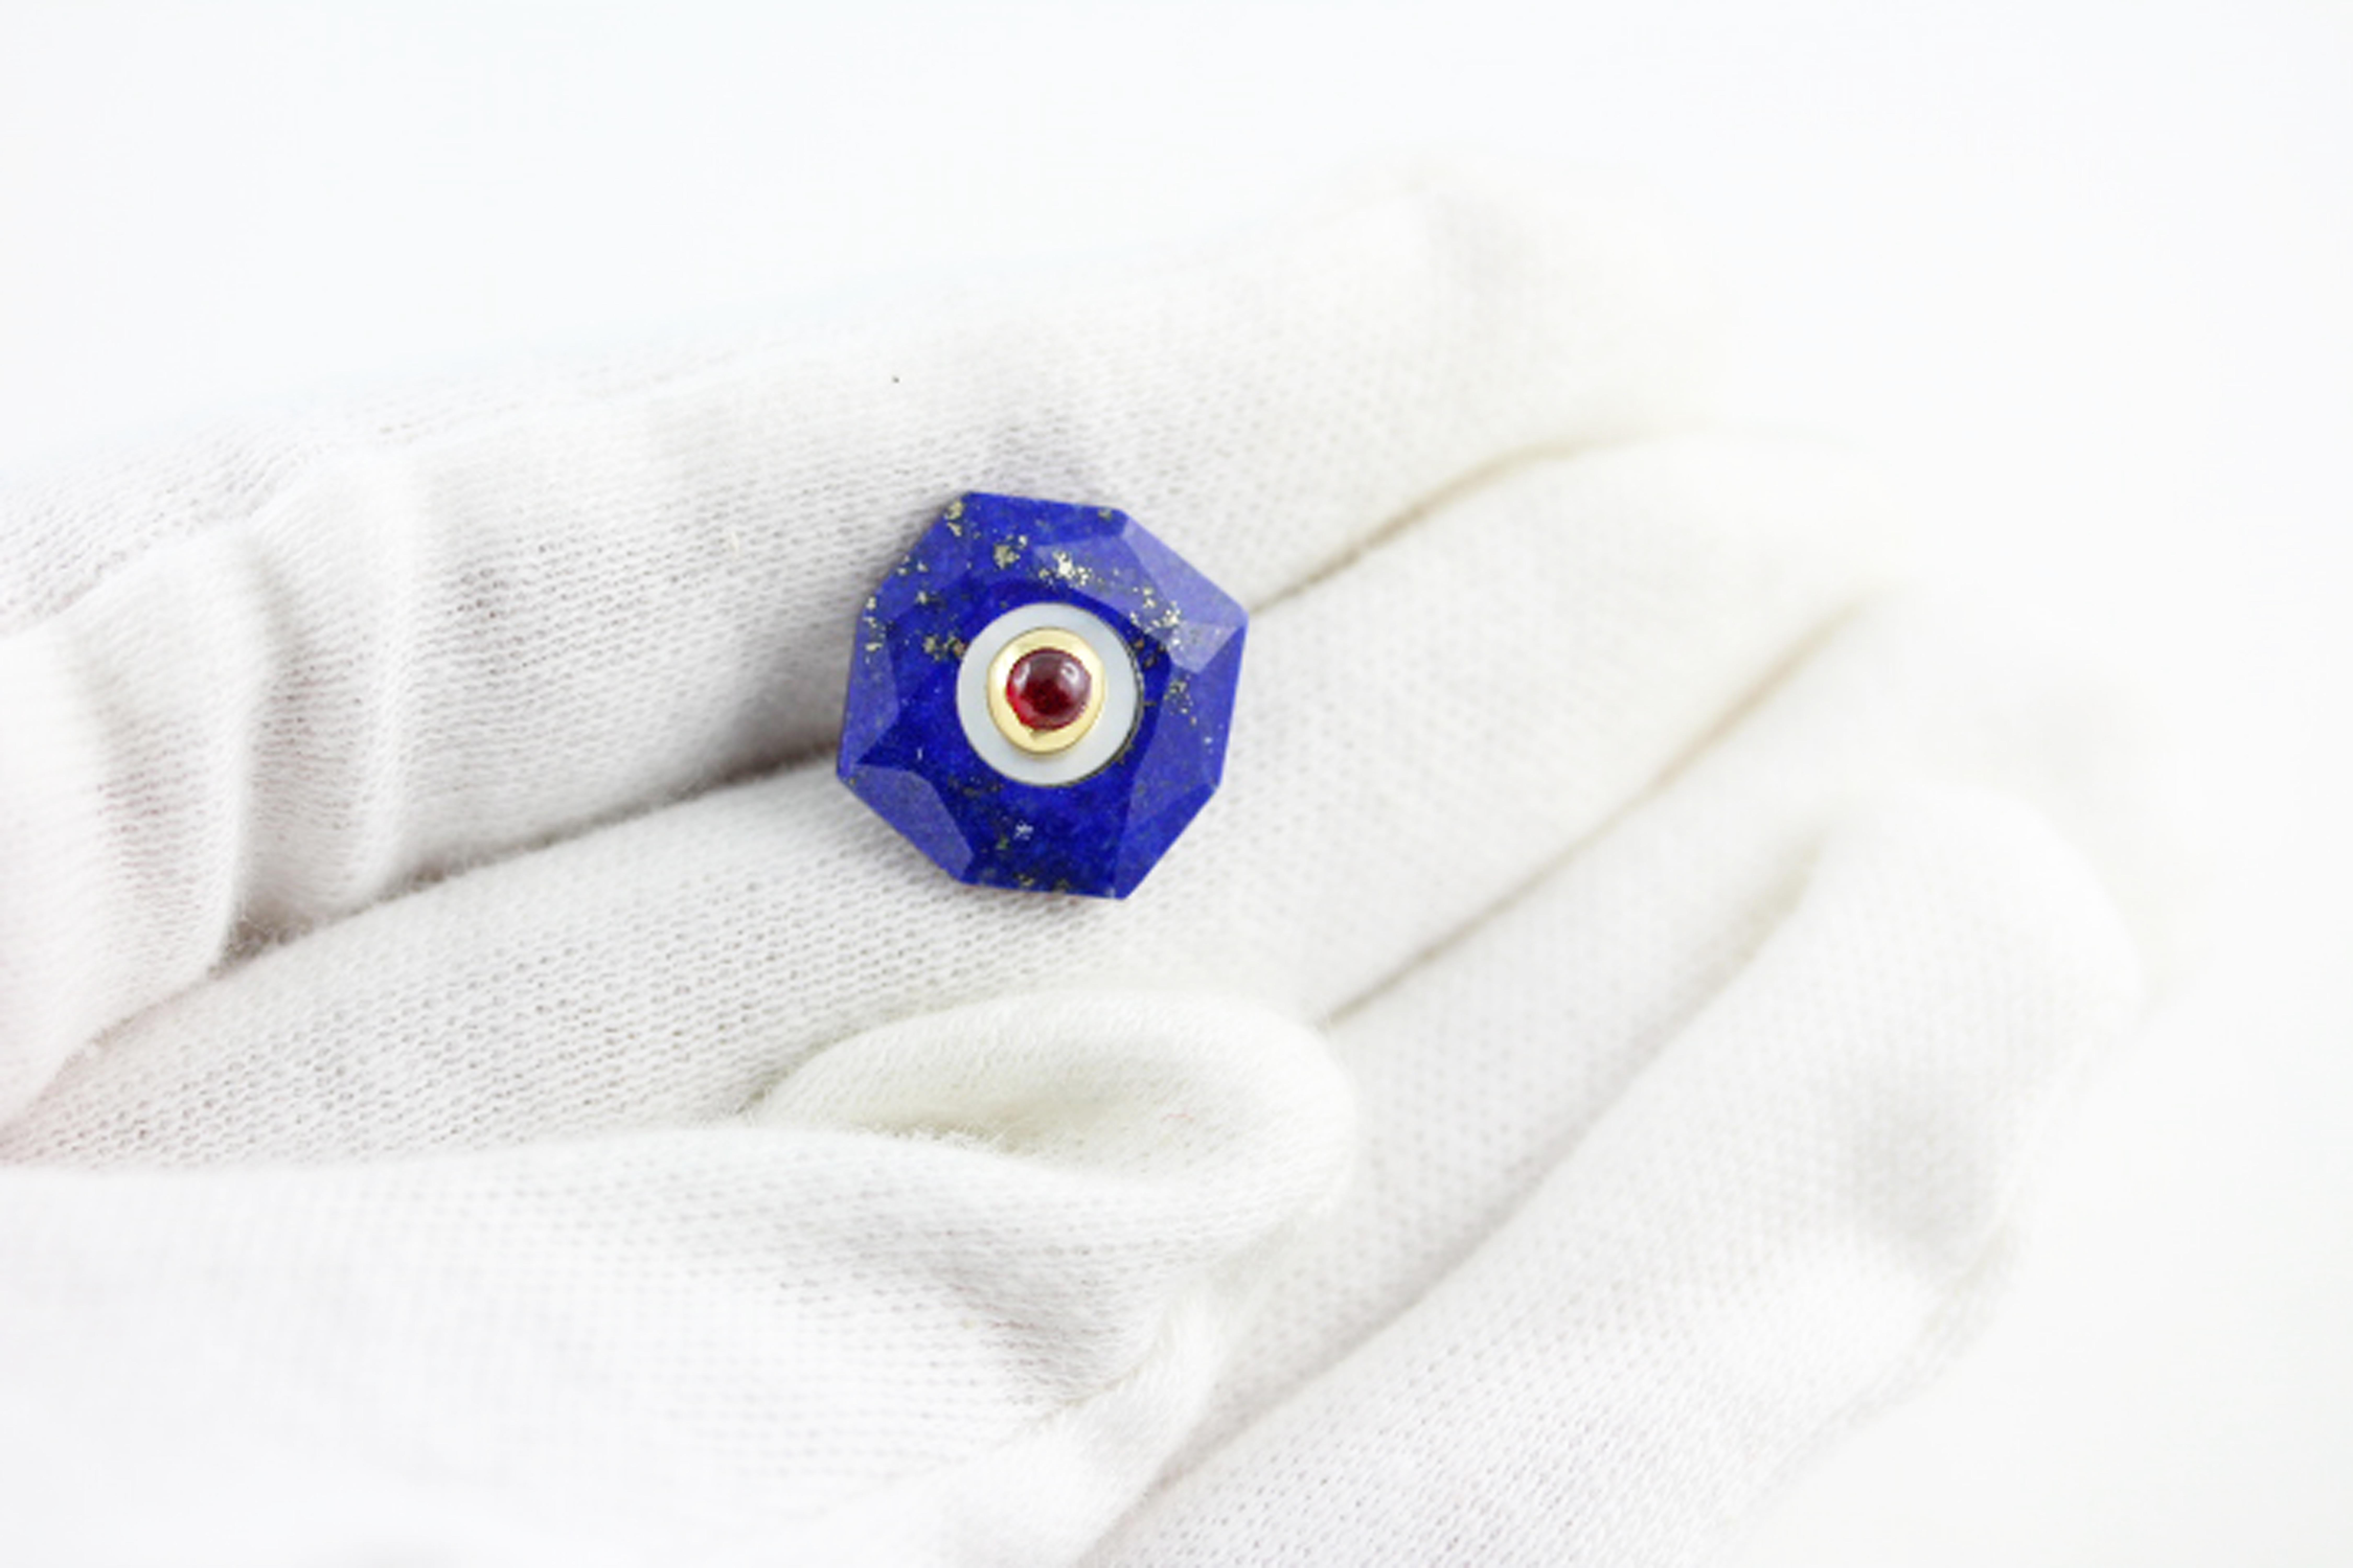 The deep blue shade of the lapis lazuli gives at this beautiful, sophisticate but at the same time classic pair of cufflinks a strong shade while the mother of pearl add a delicate accent to the octagonal, multifaceted silhouette of the front face.